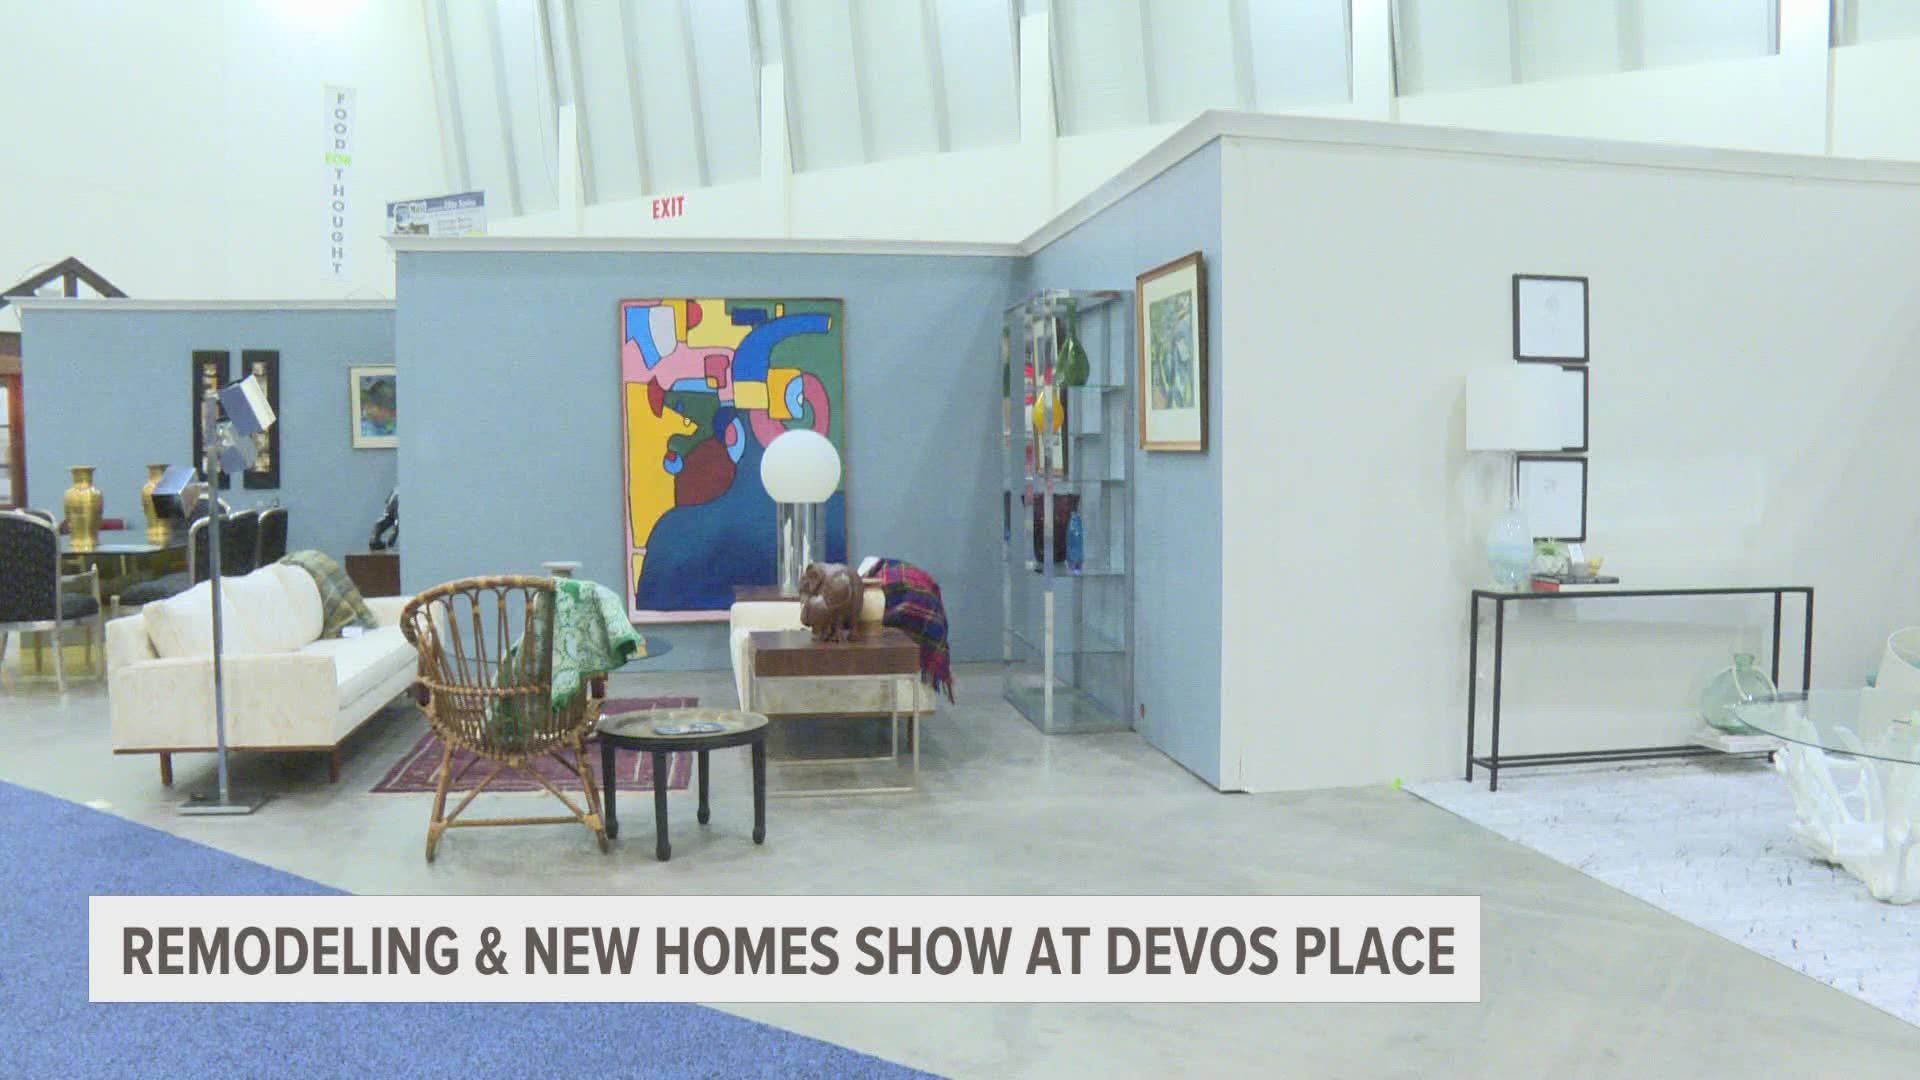 The show has everything you need to get those home renovations underway this year.